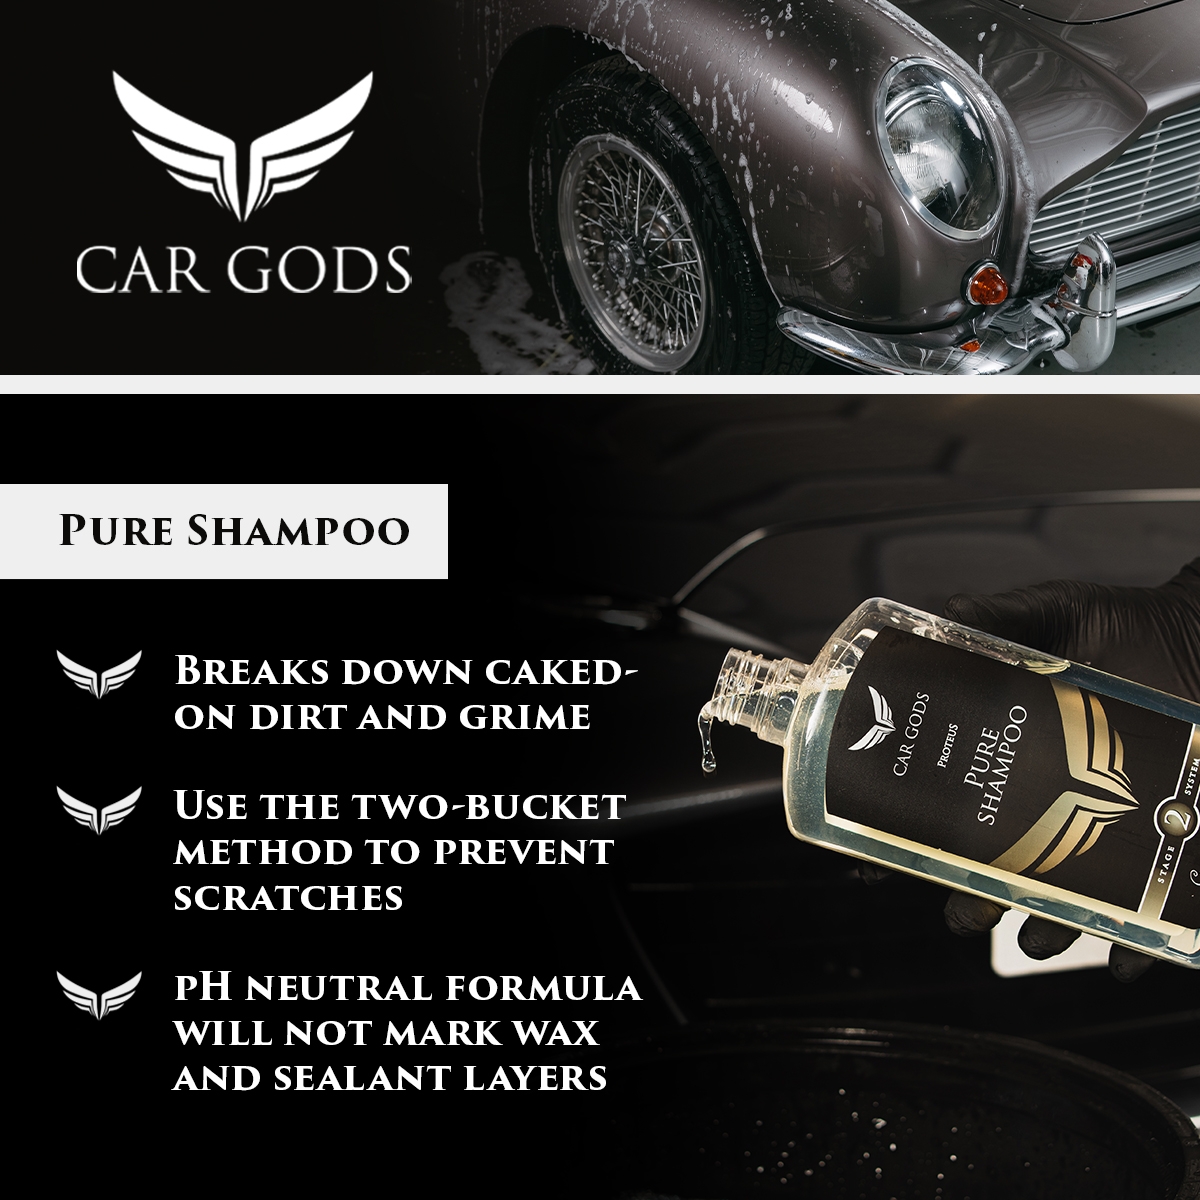 Car Gods Pure Shampoo. Break down caked-on dirt and grime using the two bucket method to prevent scratches. pH neutral car shampoo formula will not mark wax and sealant layers.